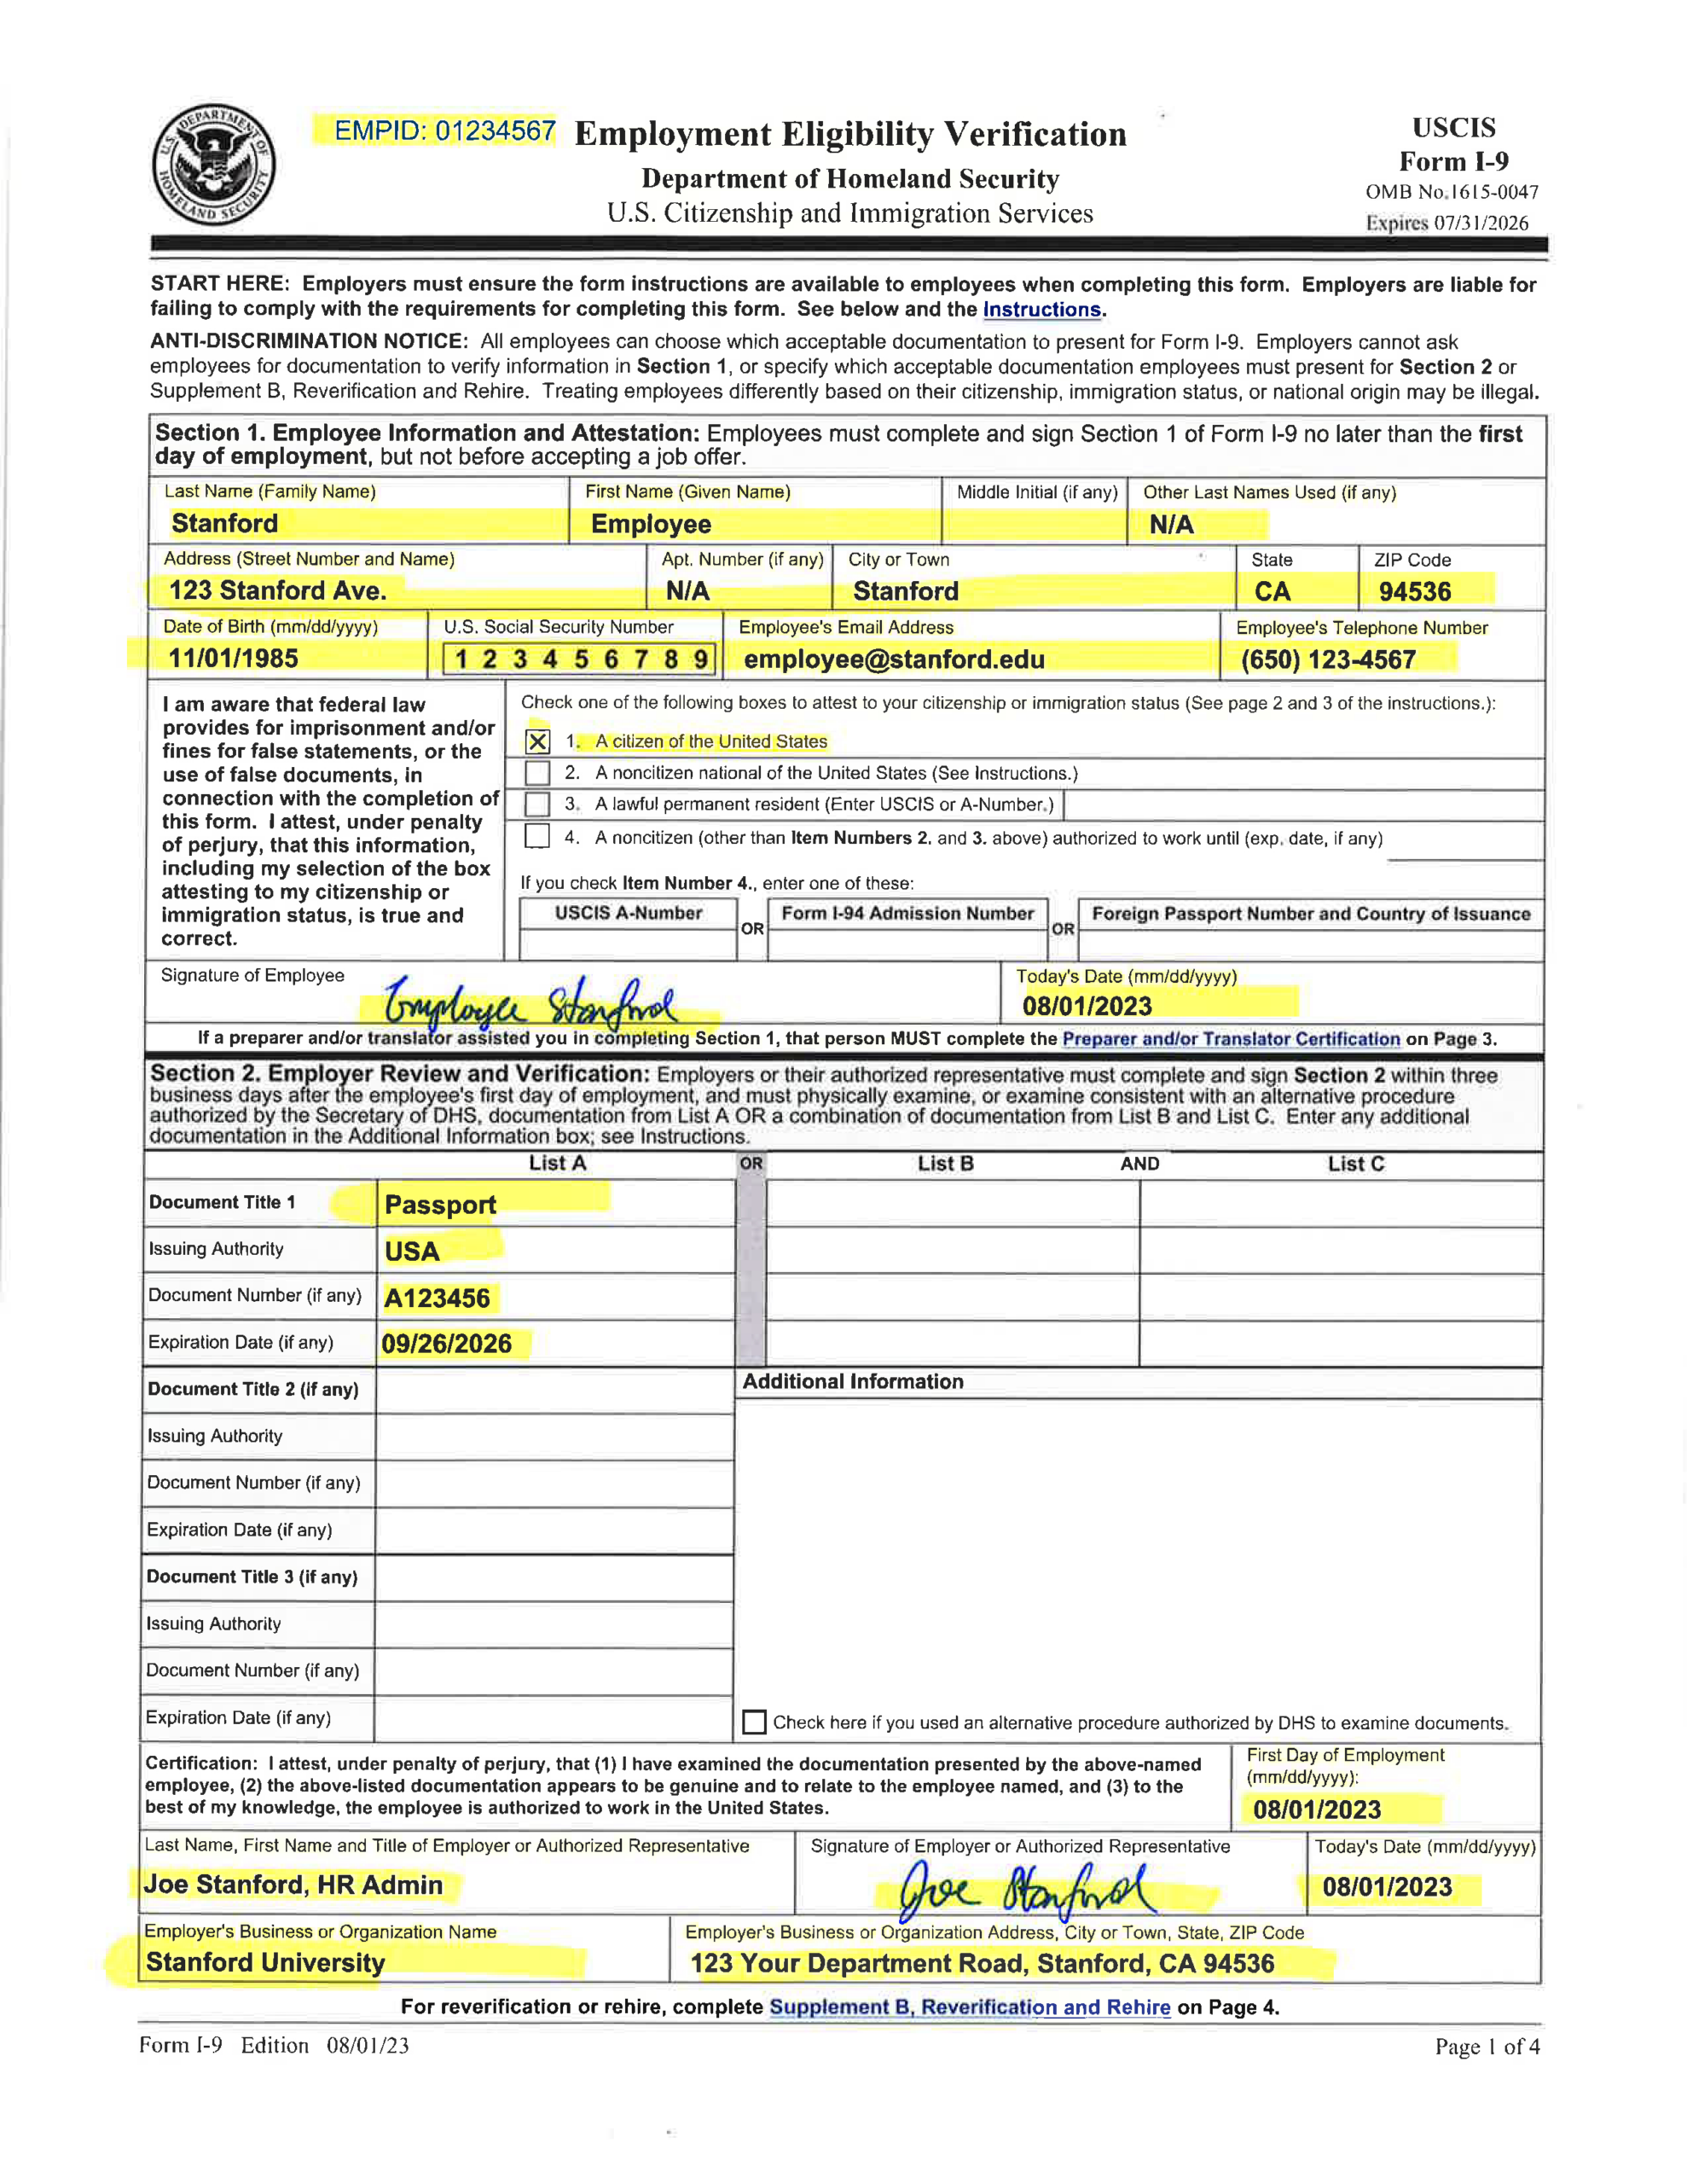 Examples Of Completed Form I-9 For Stanford in USCIS I 9 Form 2024